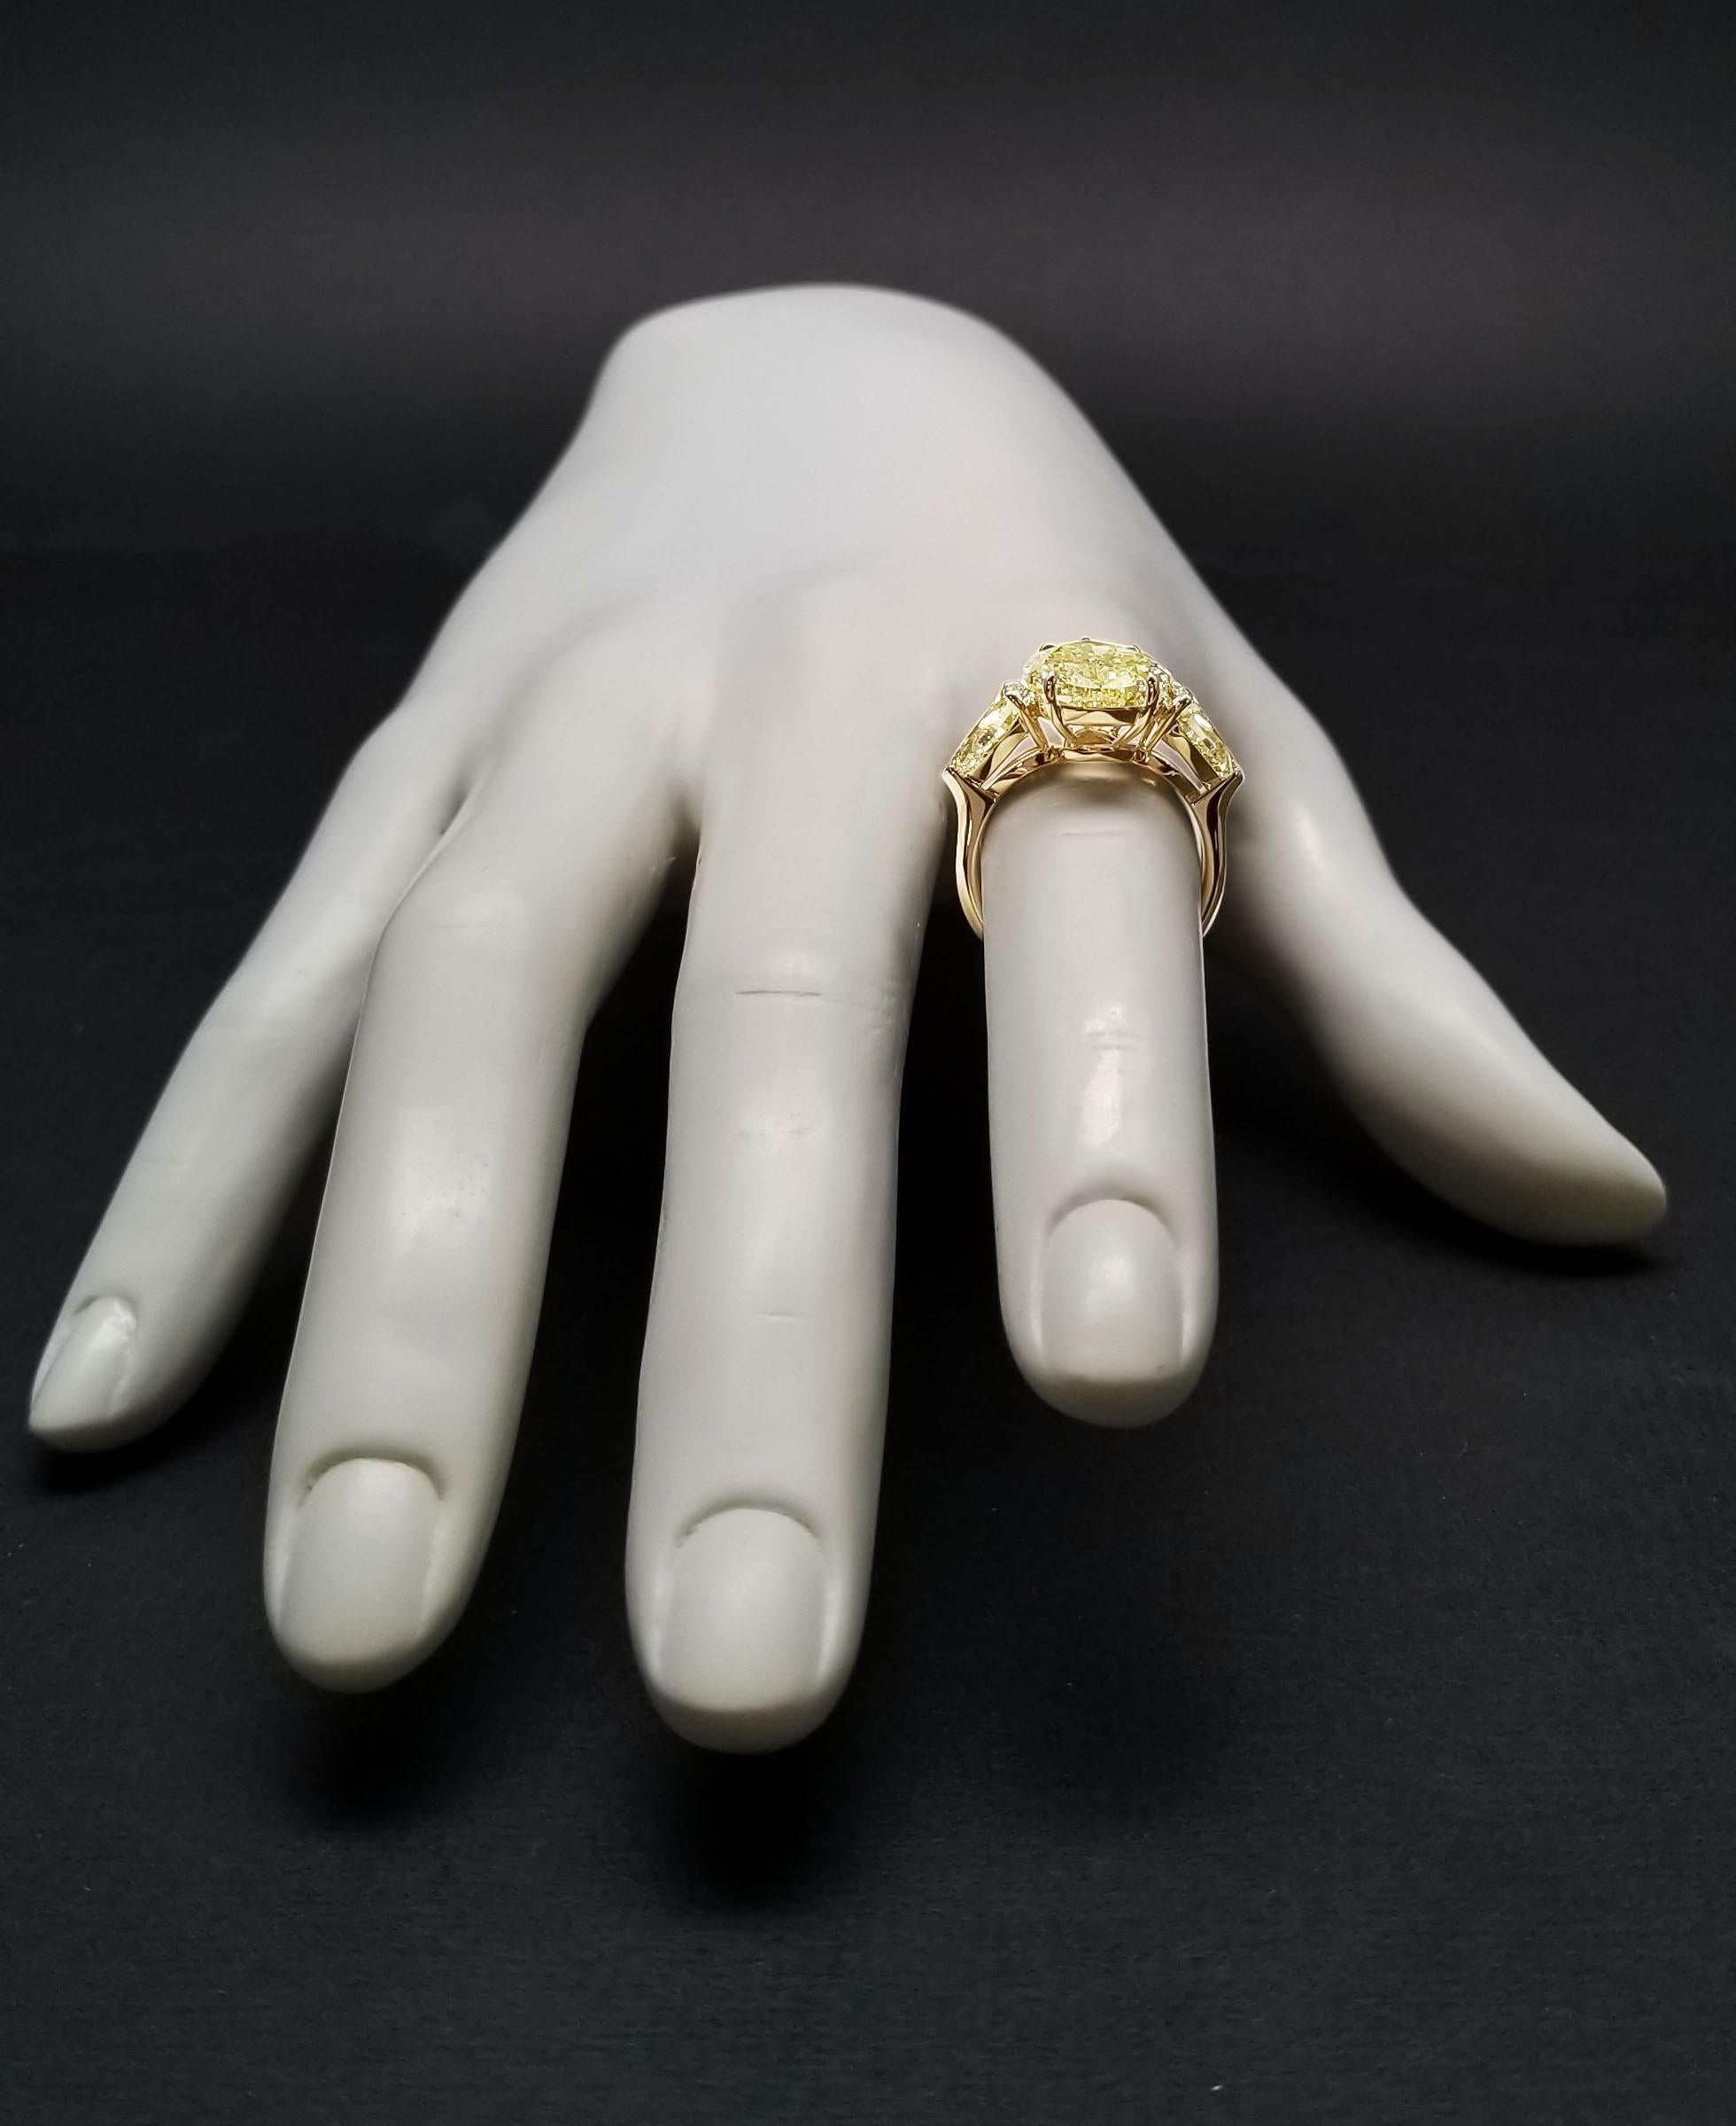 Scarselli 6 Plus Carat Fancy Yellow Pear Shaped Diamond Ring in 18k Gold In New Condition For Sale In New York, NY